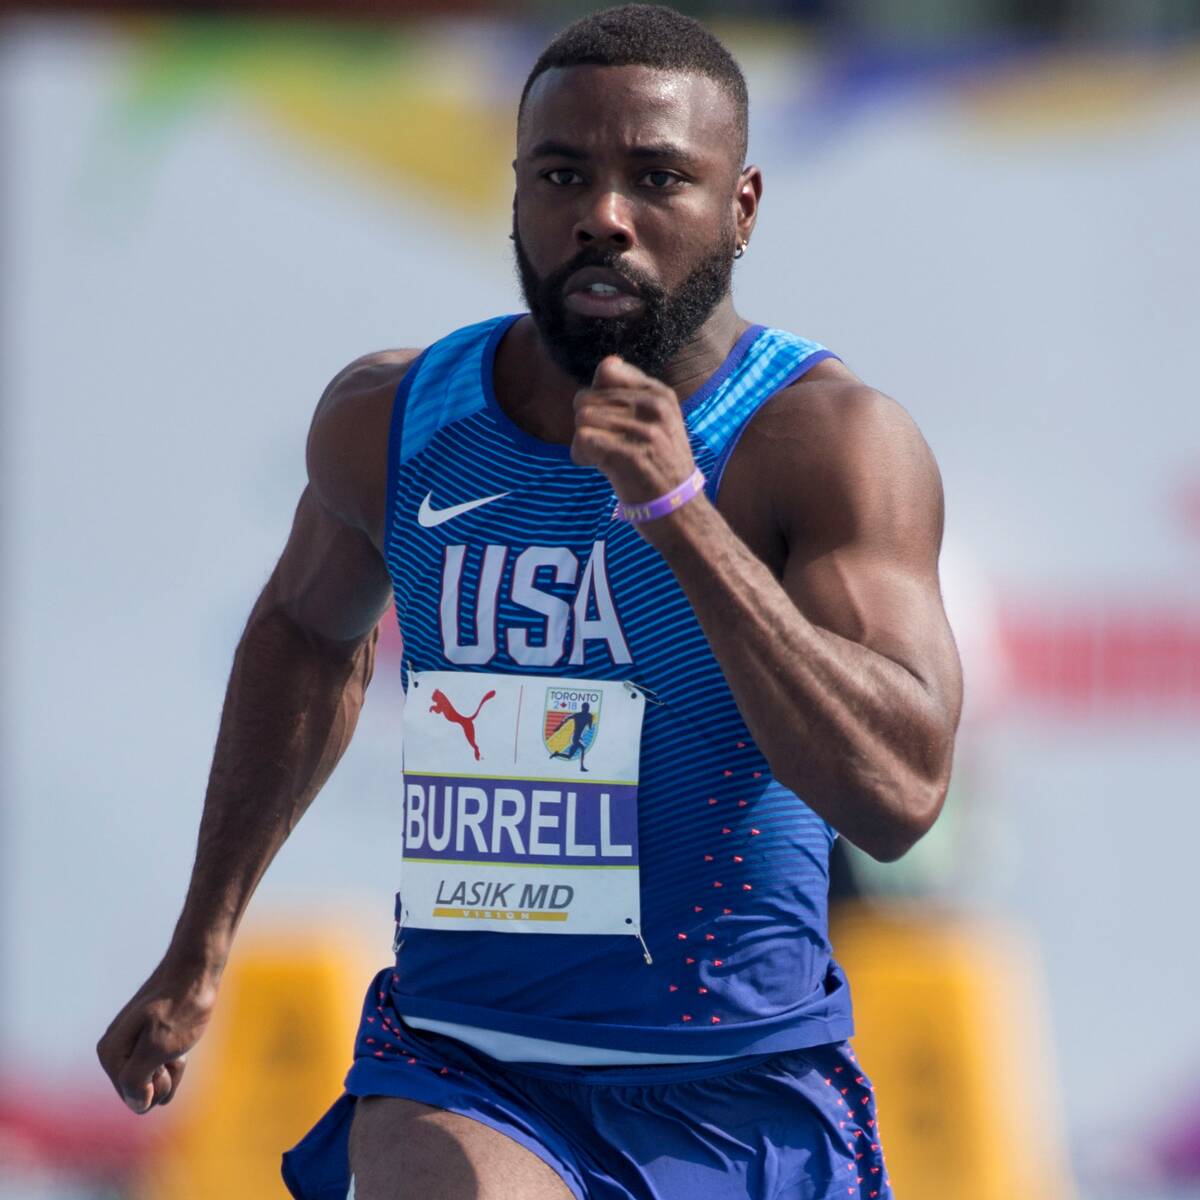 Former College Track Star Cameron Burrell Dead at 26